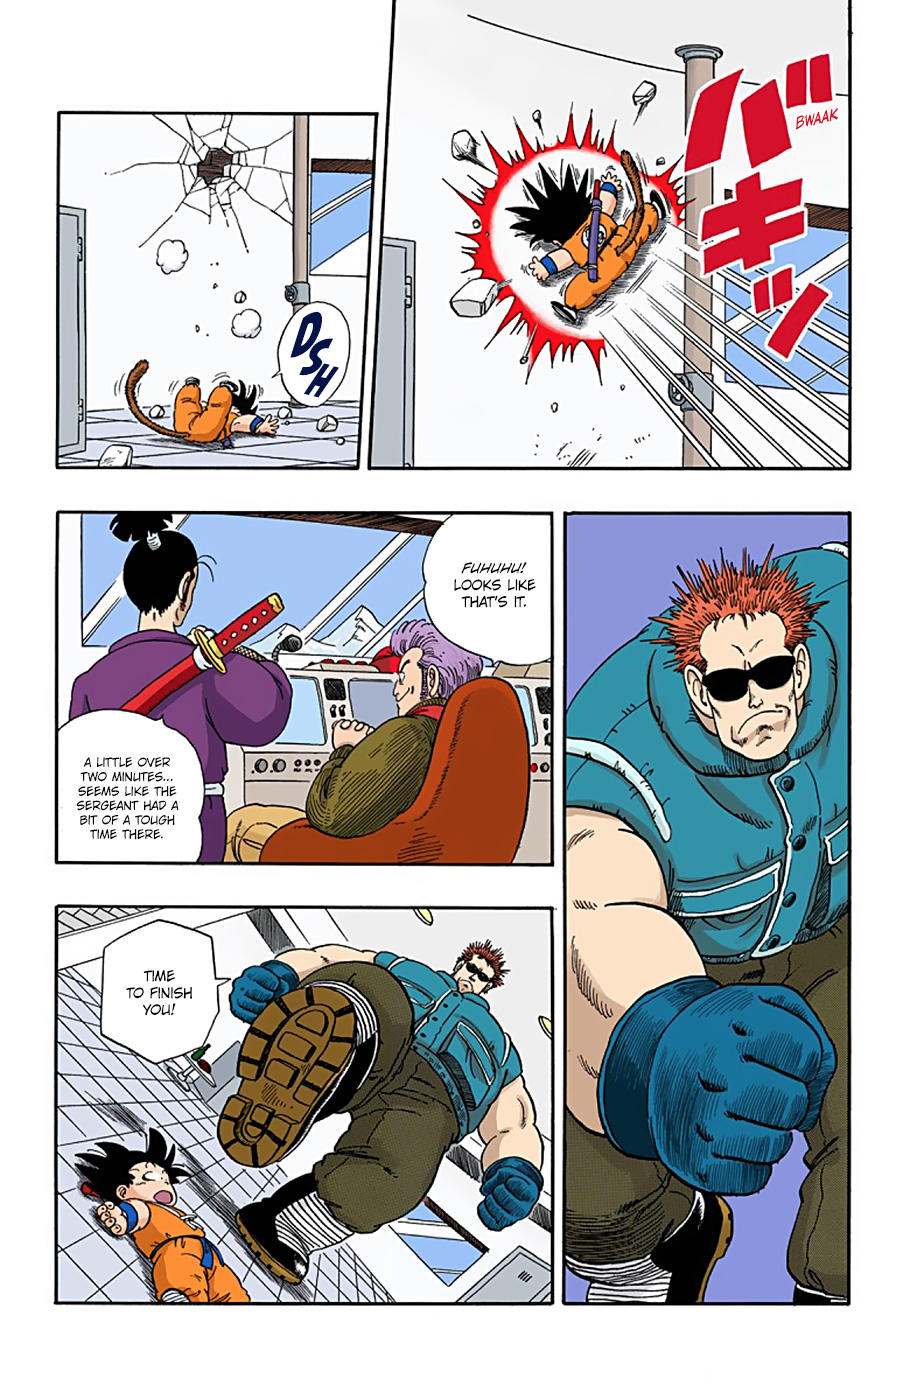 Dragon Ball - Full Color Edition Vol.5 Chapter 59: The Demon On The Third Floor!! page 4 - Mangakakalot